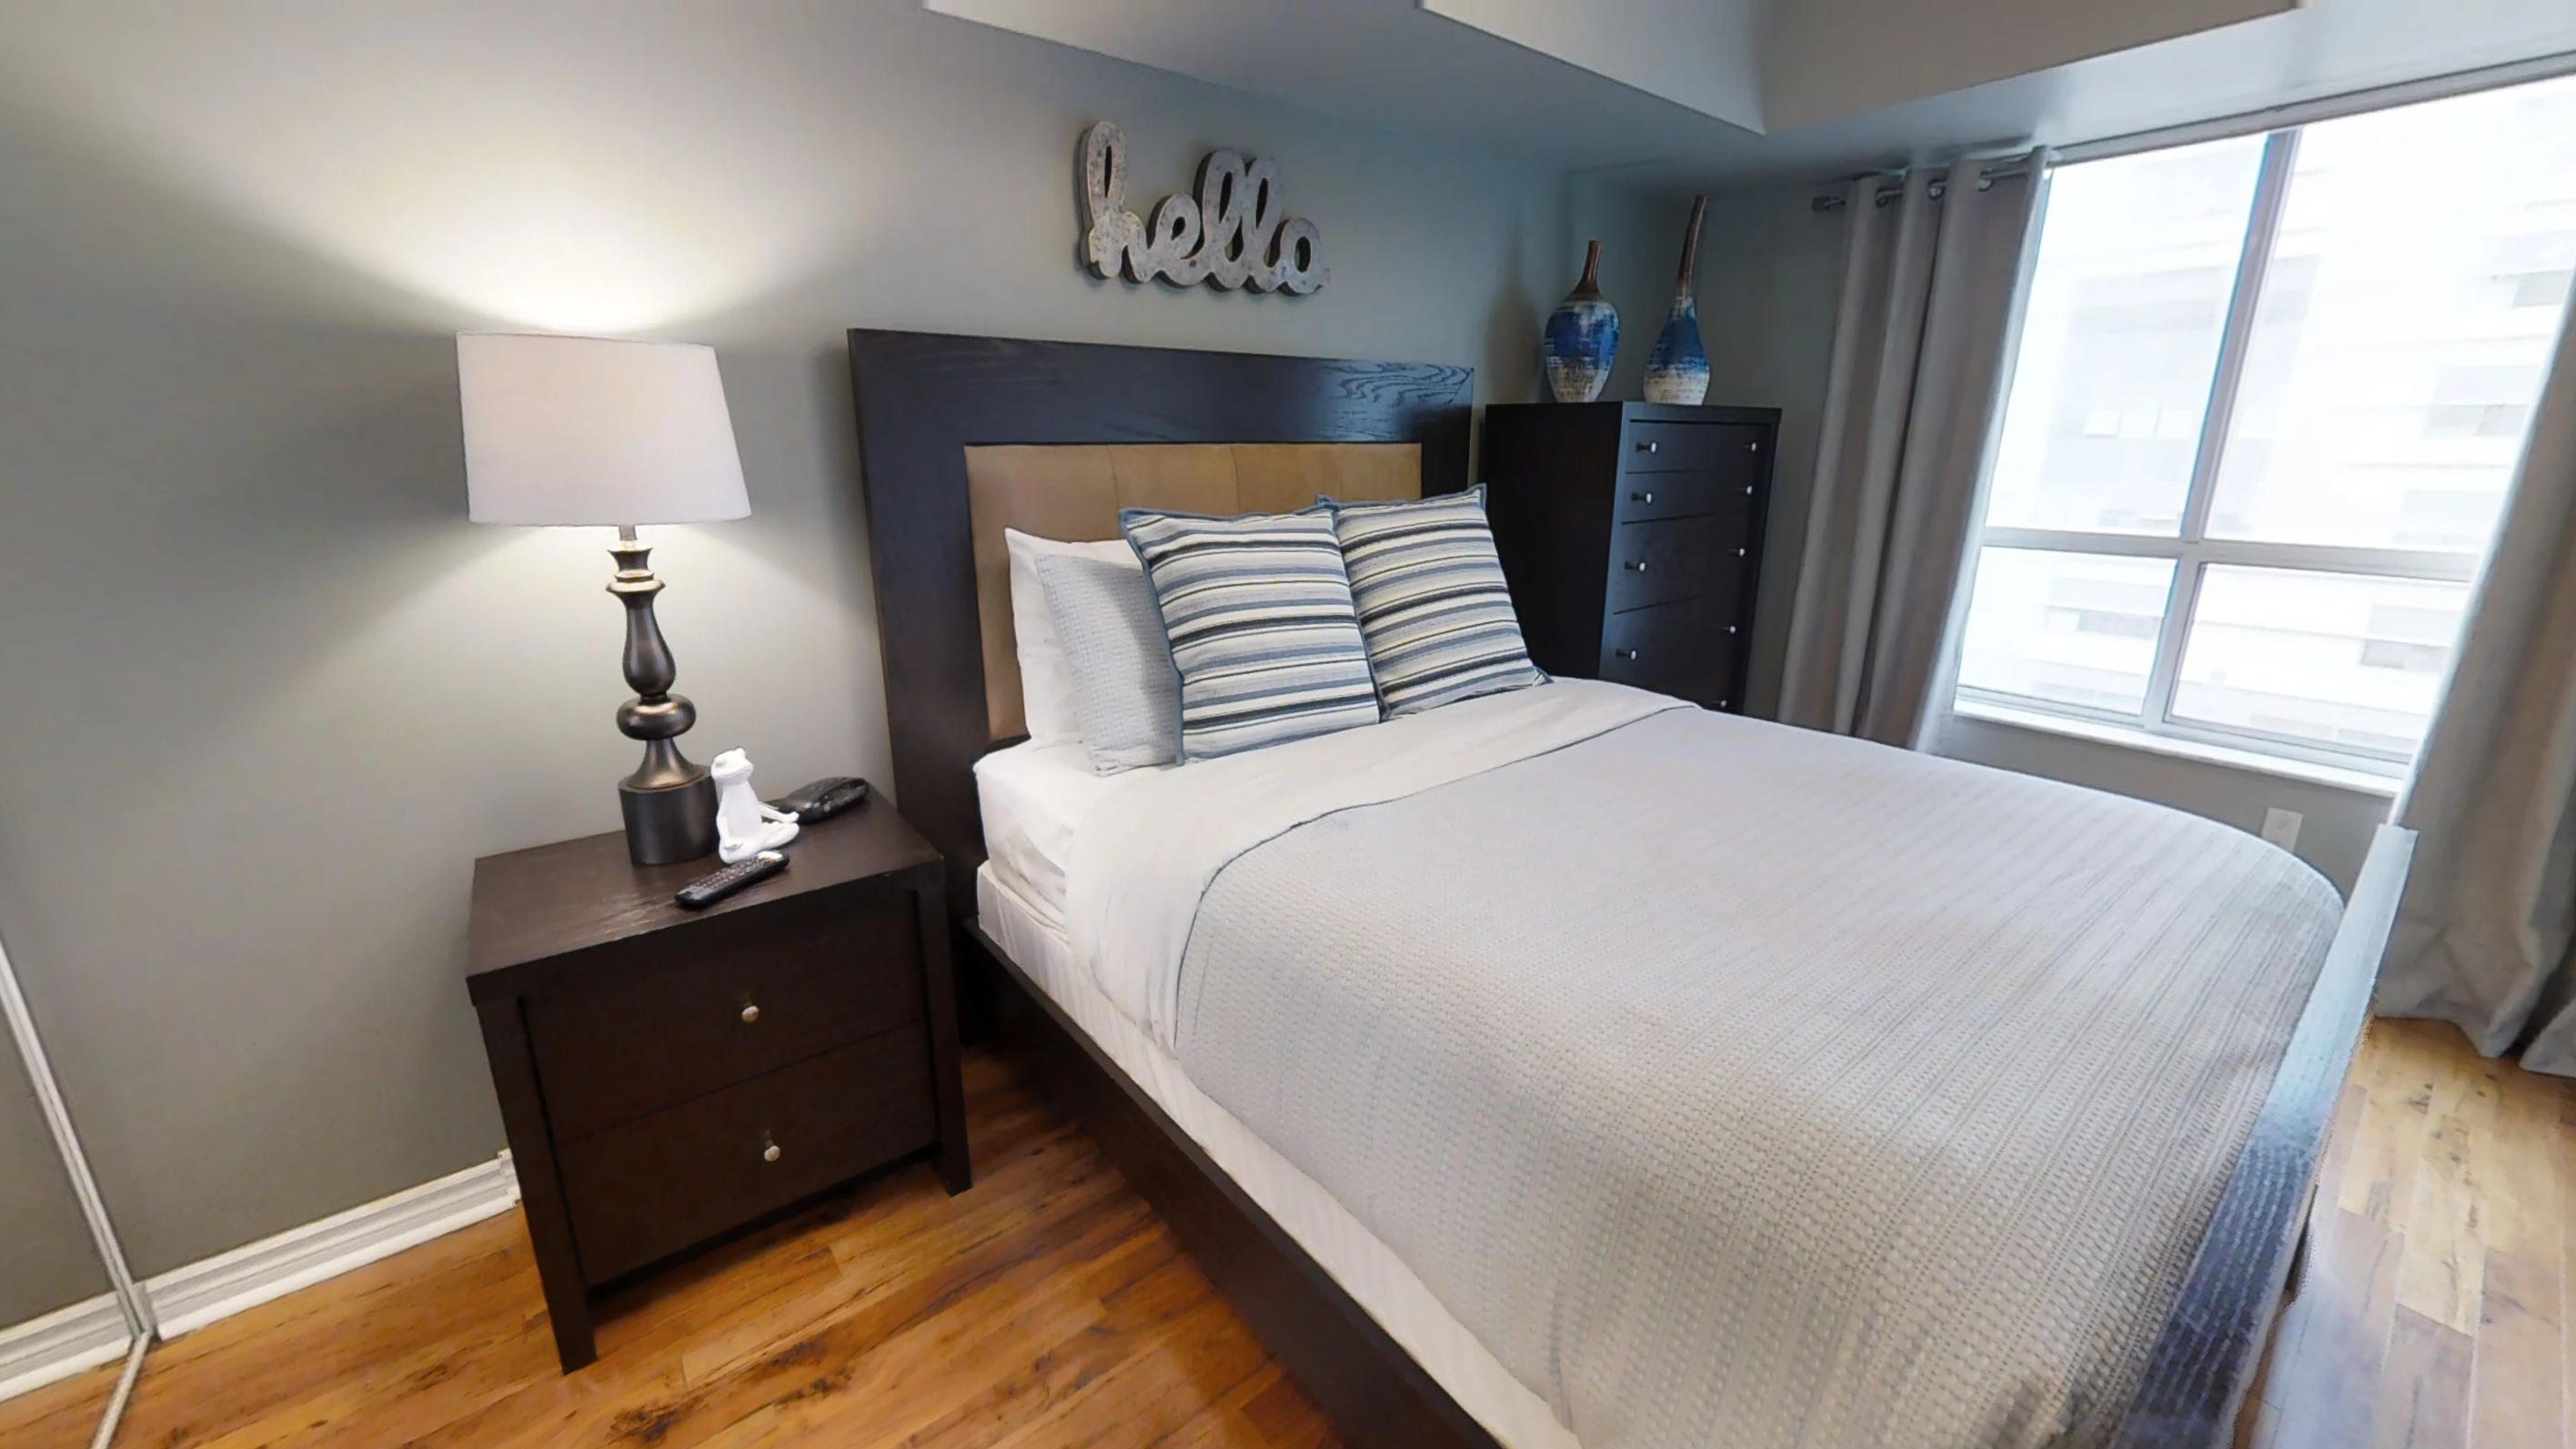 The bedroom in the toronto furnished apartment in Qwest condominiums near Toronto's Financial district, perfect for corporate housing clients